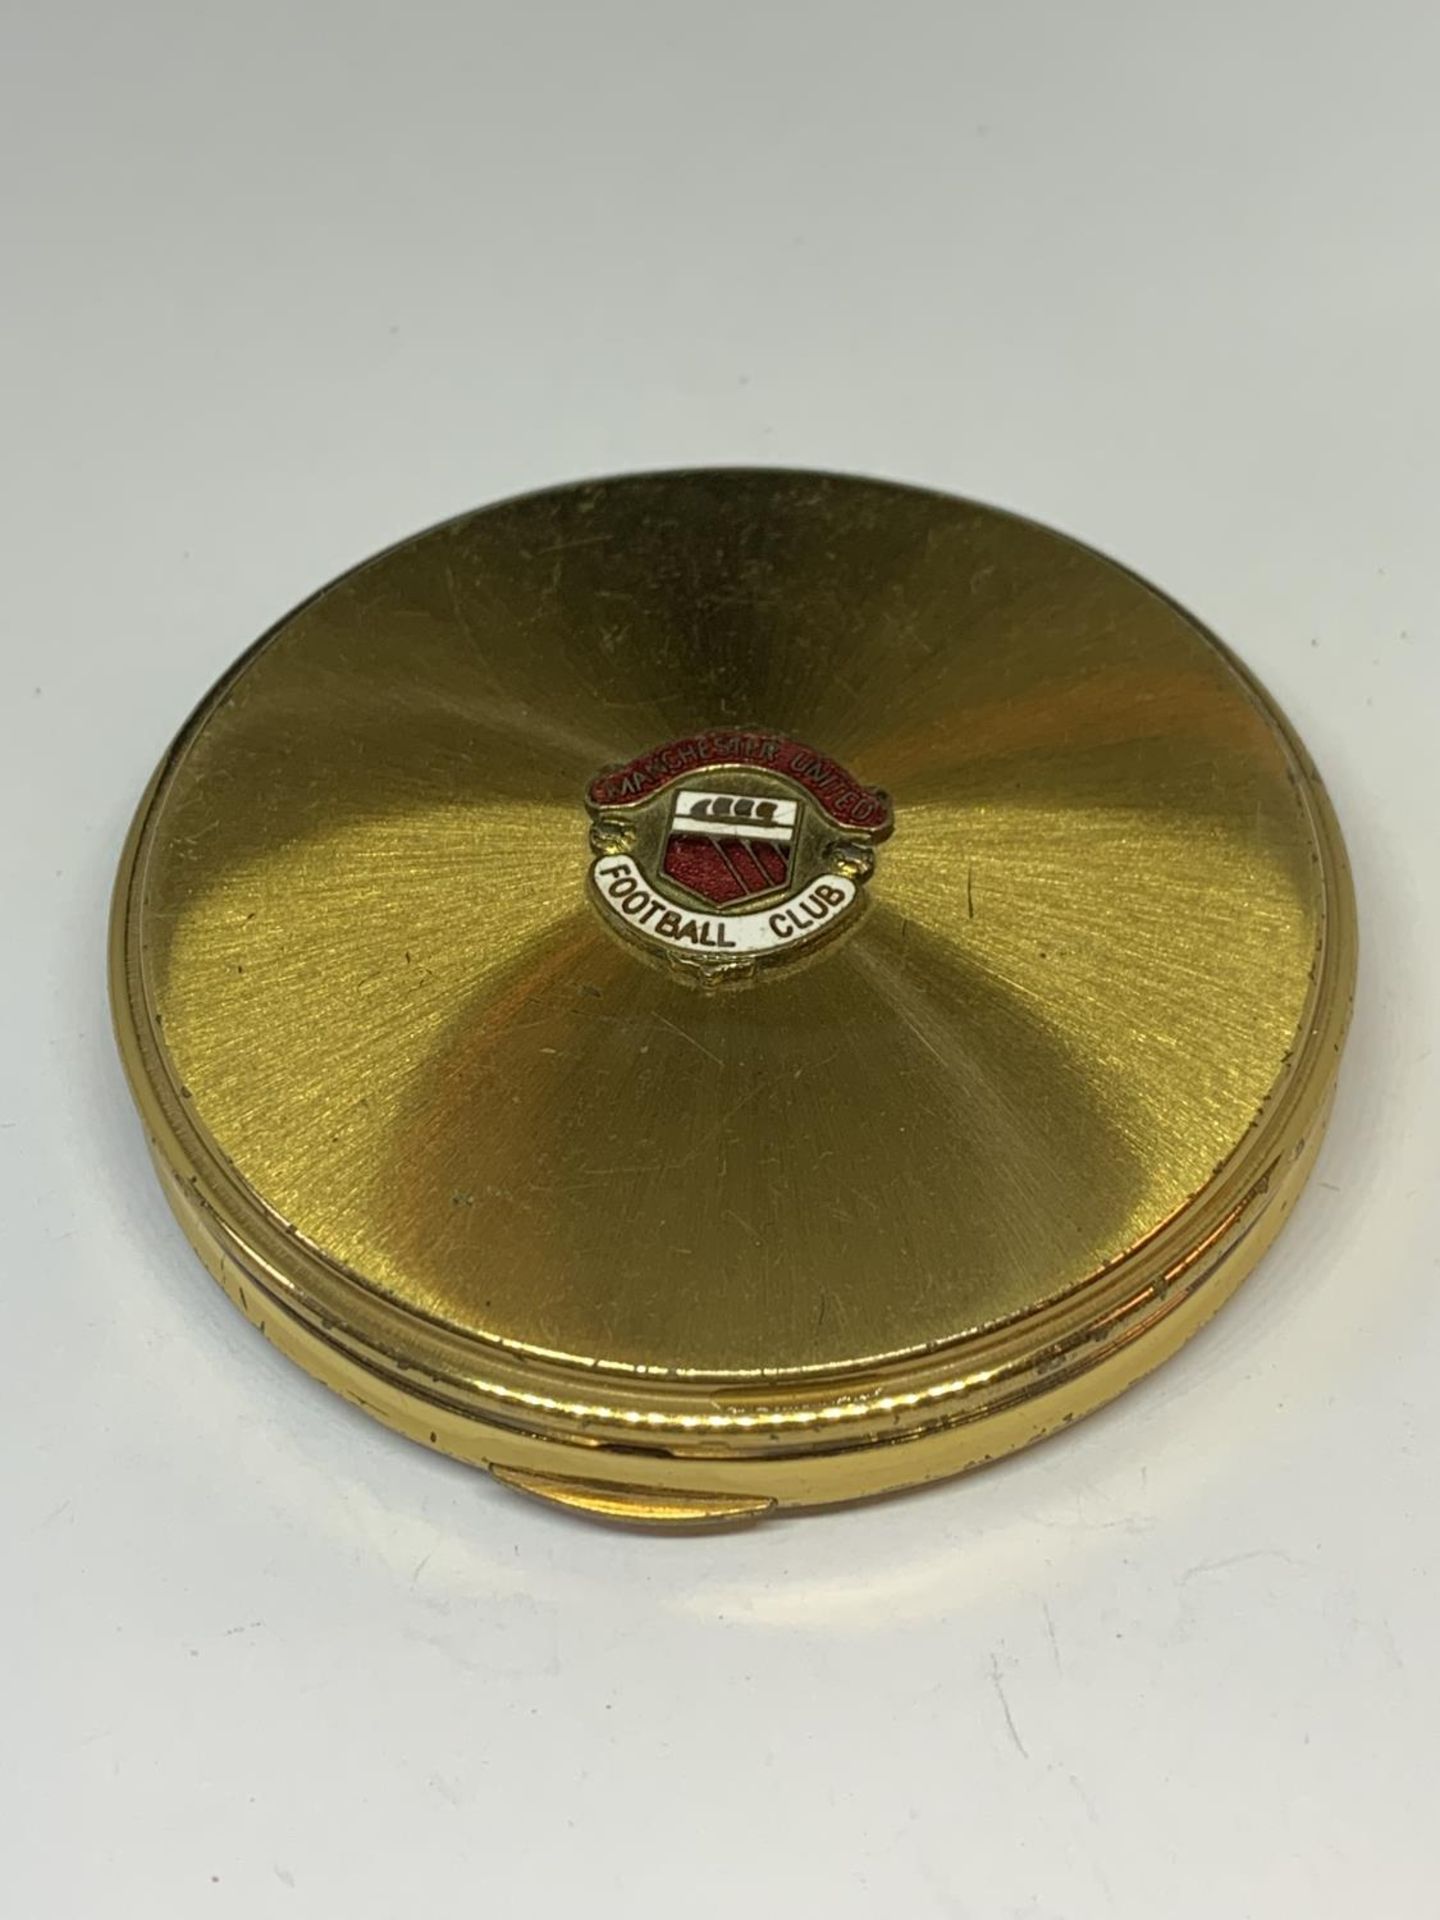 A MANCHESTER UNITED POWDER COMPACT - Image 2 of 8